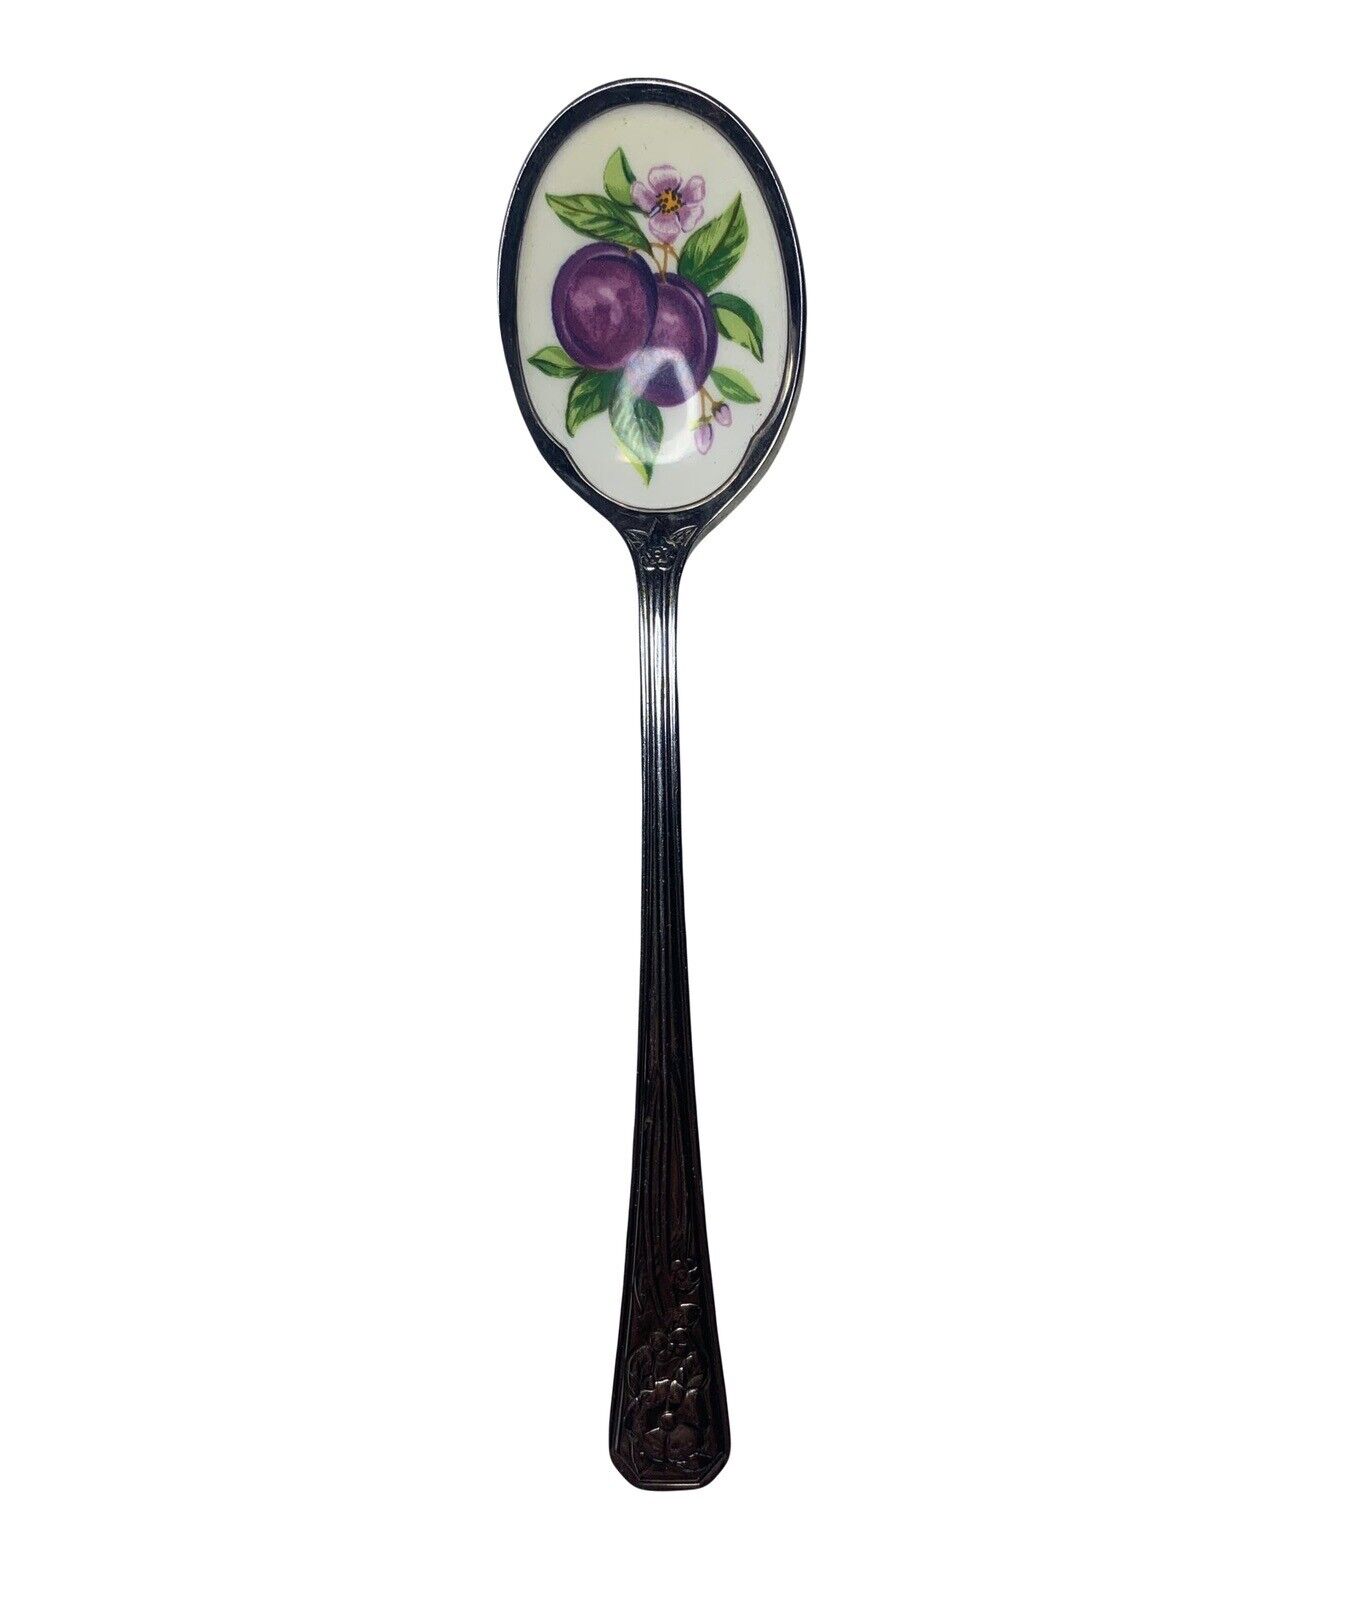 Vintage AVON Nature’s Best Collectors Spoon Mixed Berries Stainless Steel